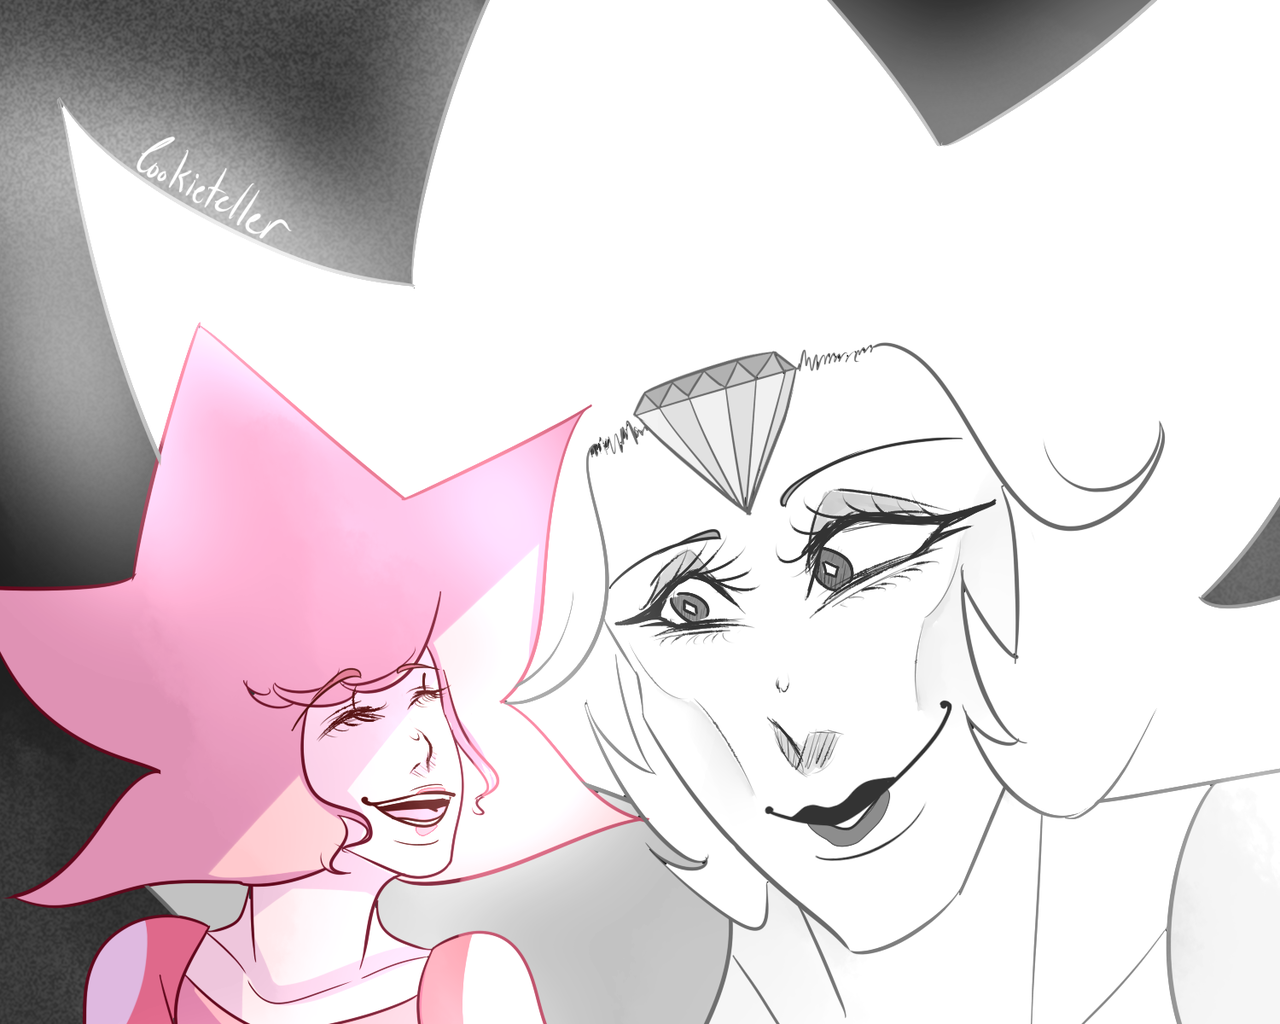 Pink Diamond making her other fellow Diamonds laugh except for White cuz she be mysterious af